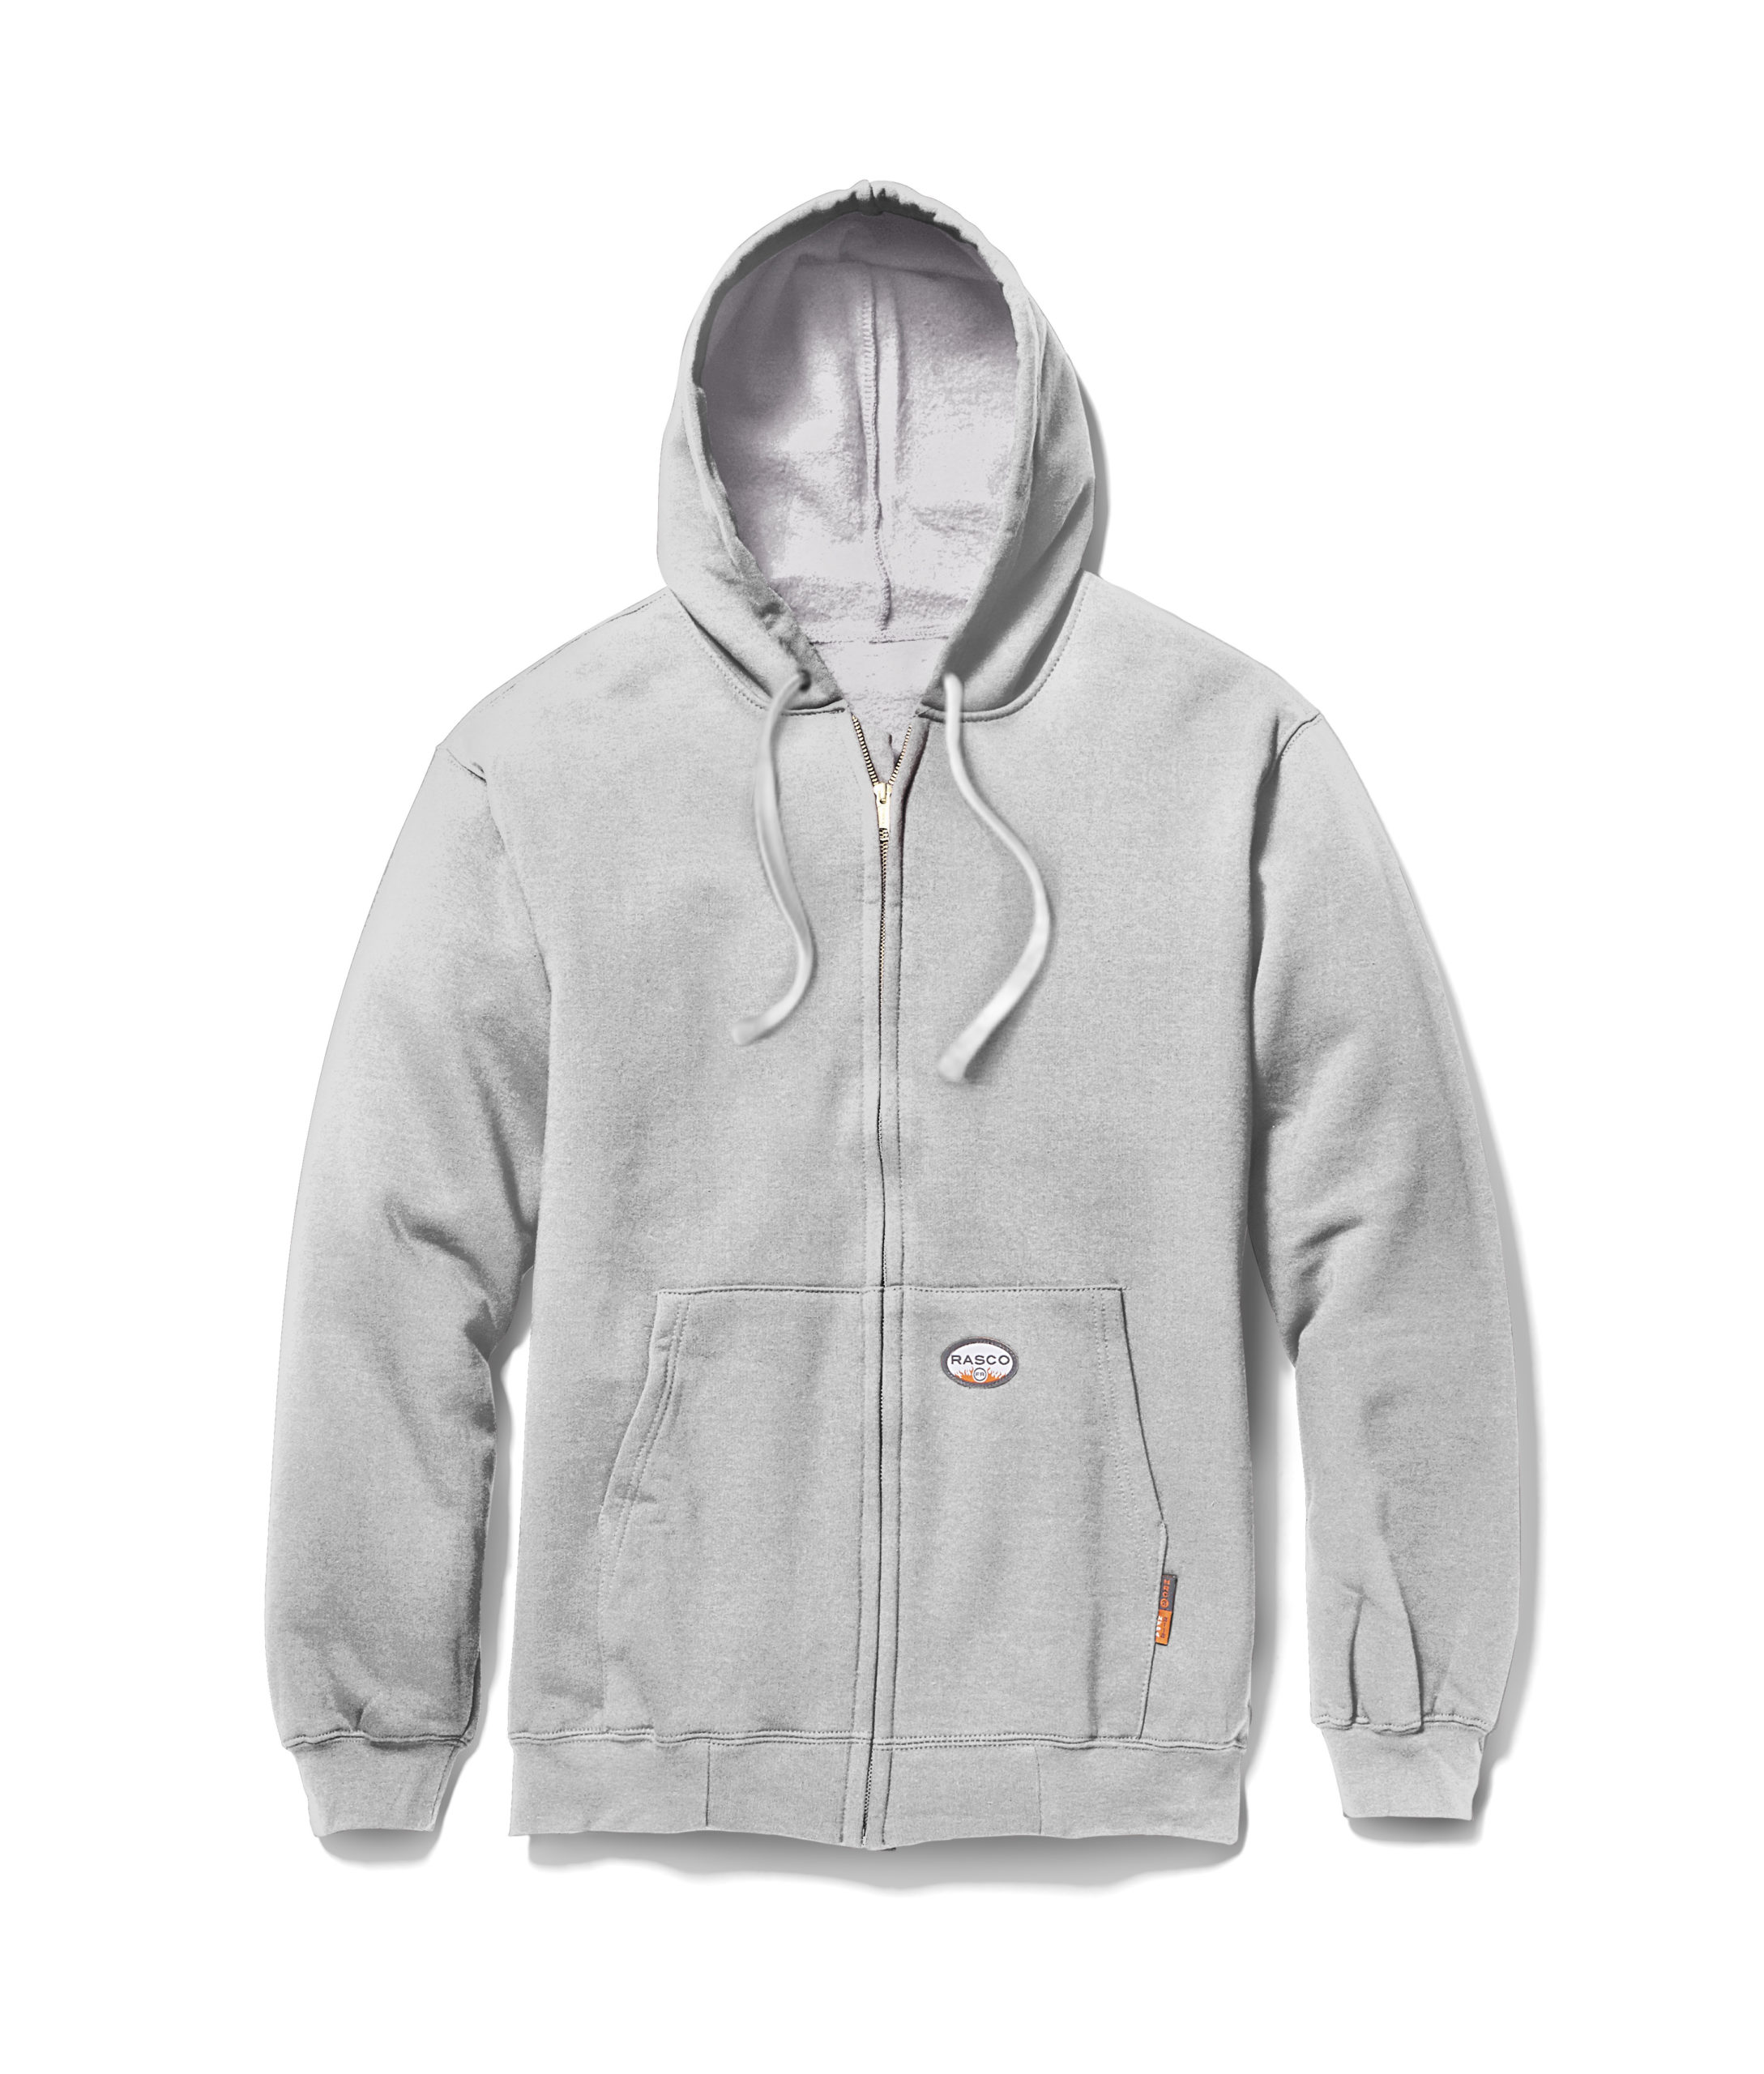 This image portrays Fire Retardant Fleece Zip-Front Hooded Sweatshirt by Government Suppliers & Associates.